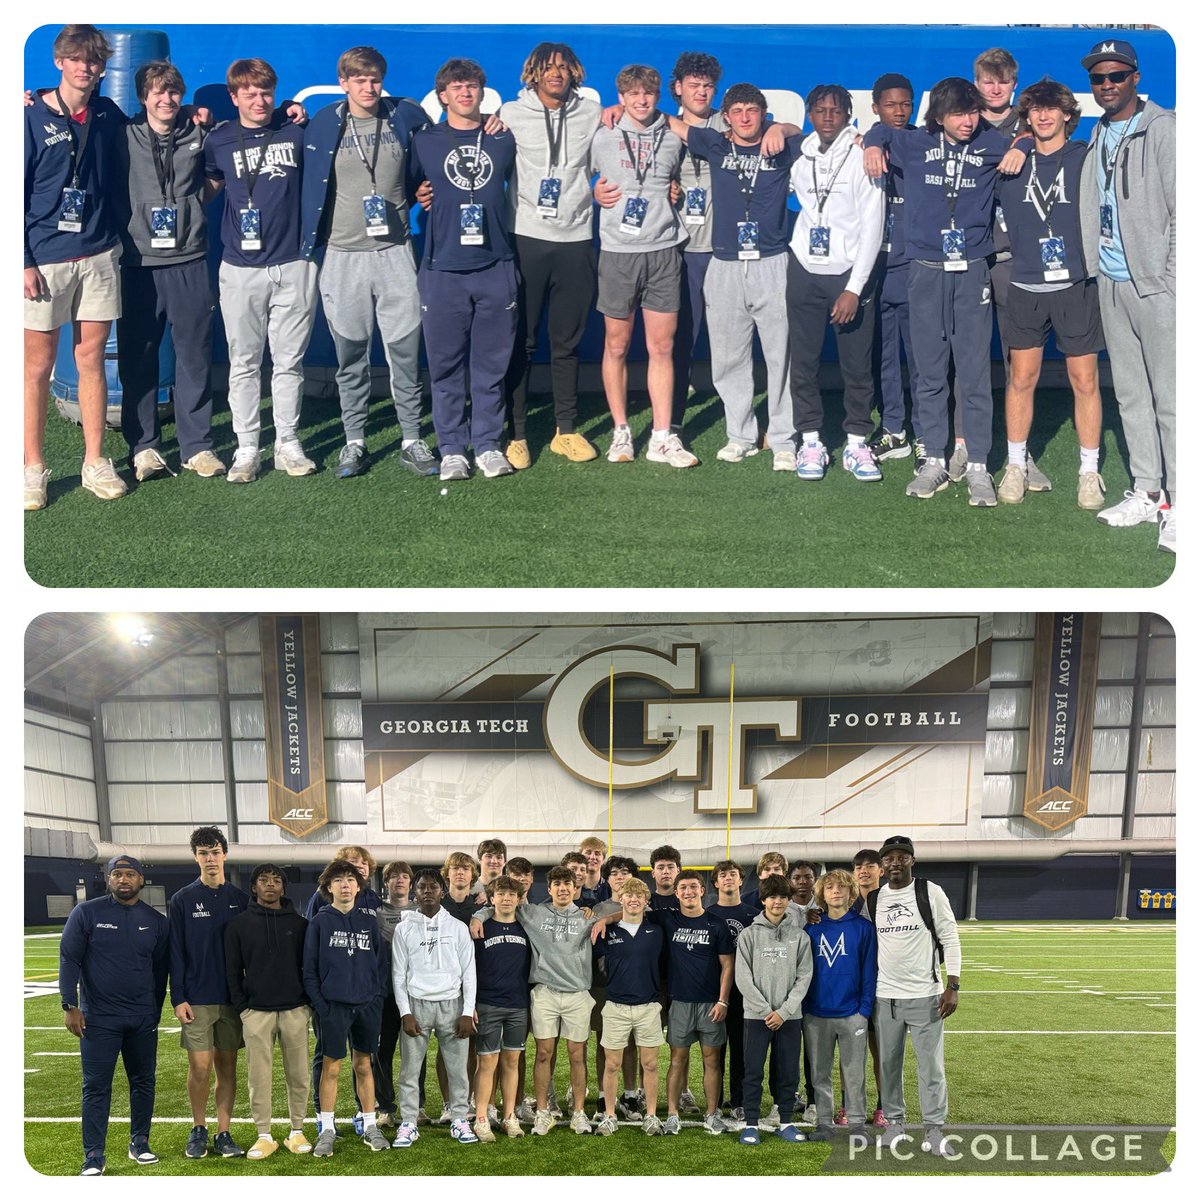 .@MV_Athletics got the opportunity to visit Ga Tech & Ga St the past two weekends. It’s all about exposure and development at #MV24. @CoachKent41